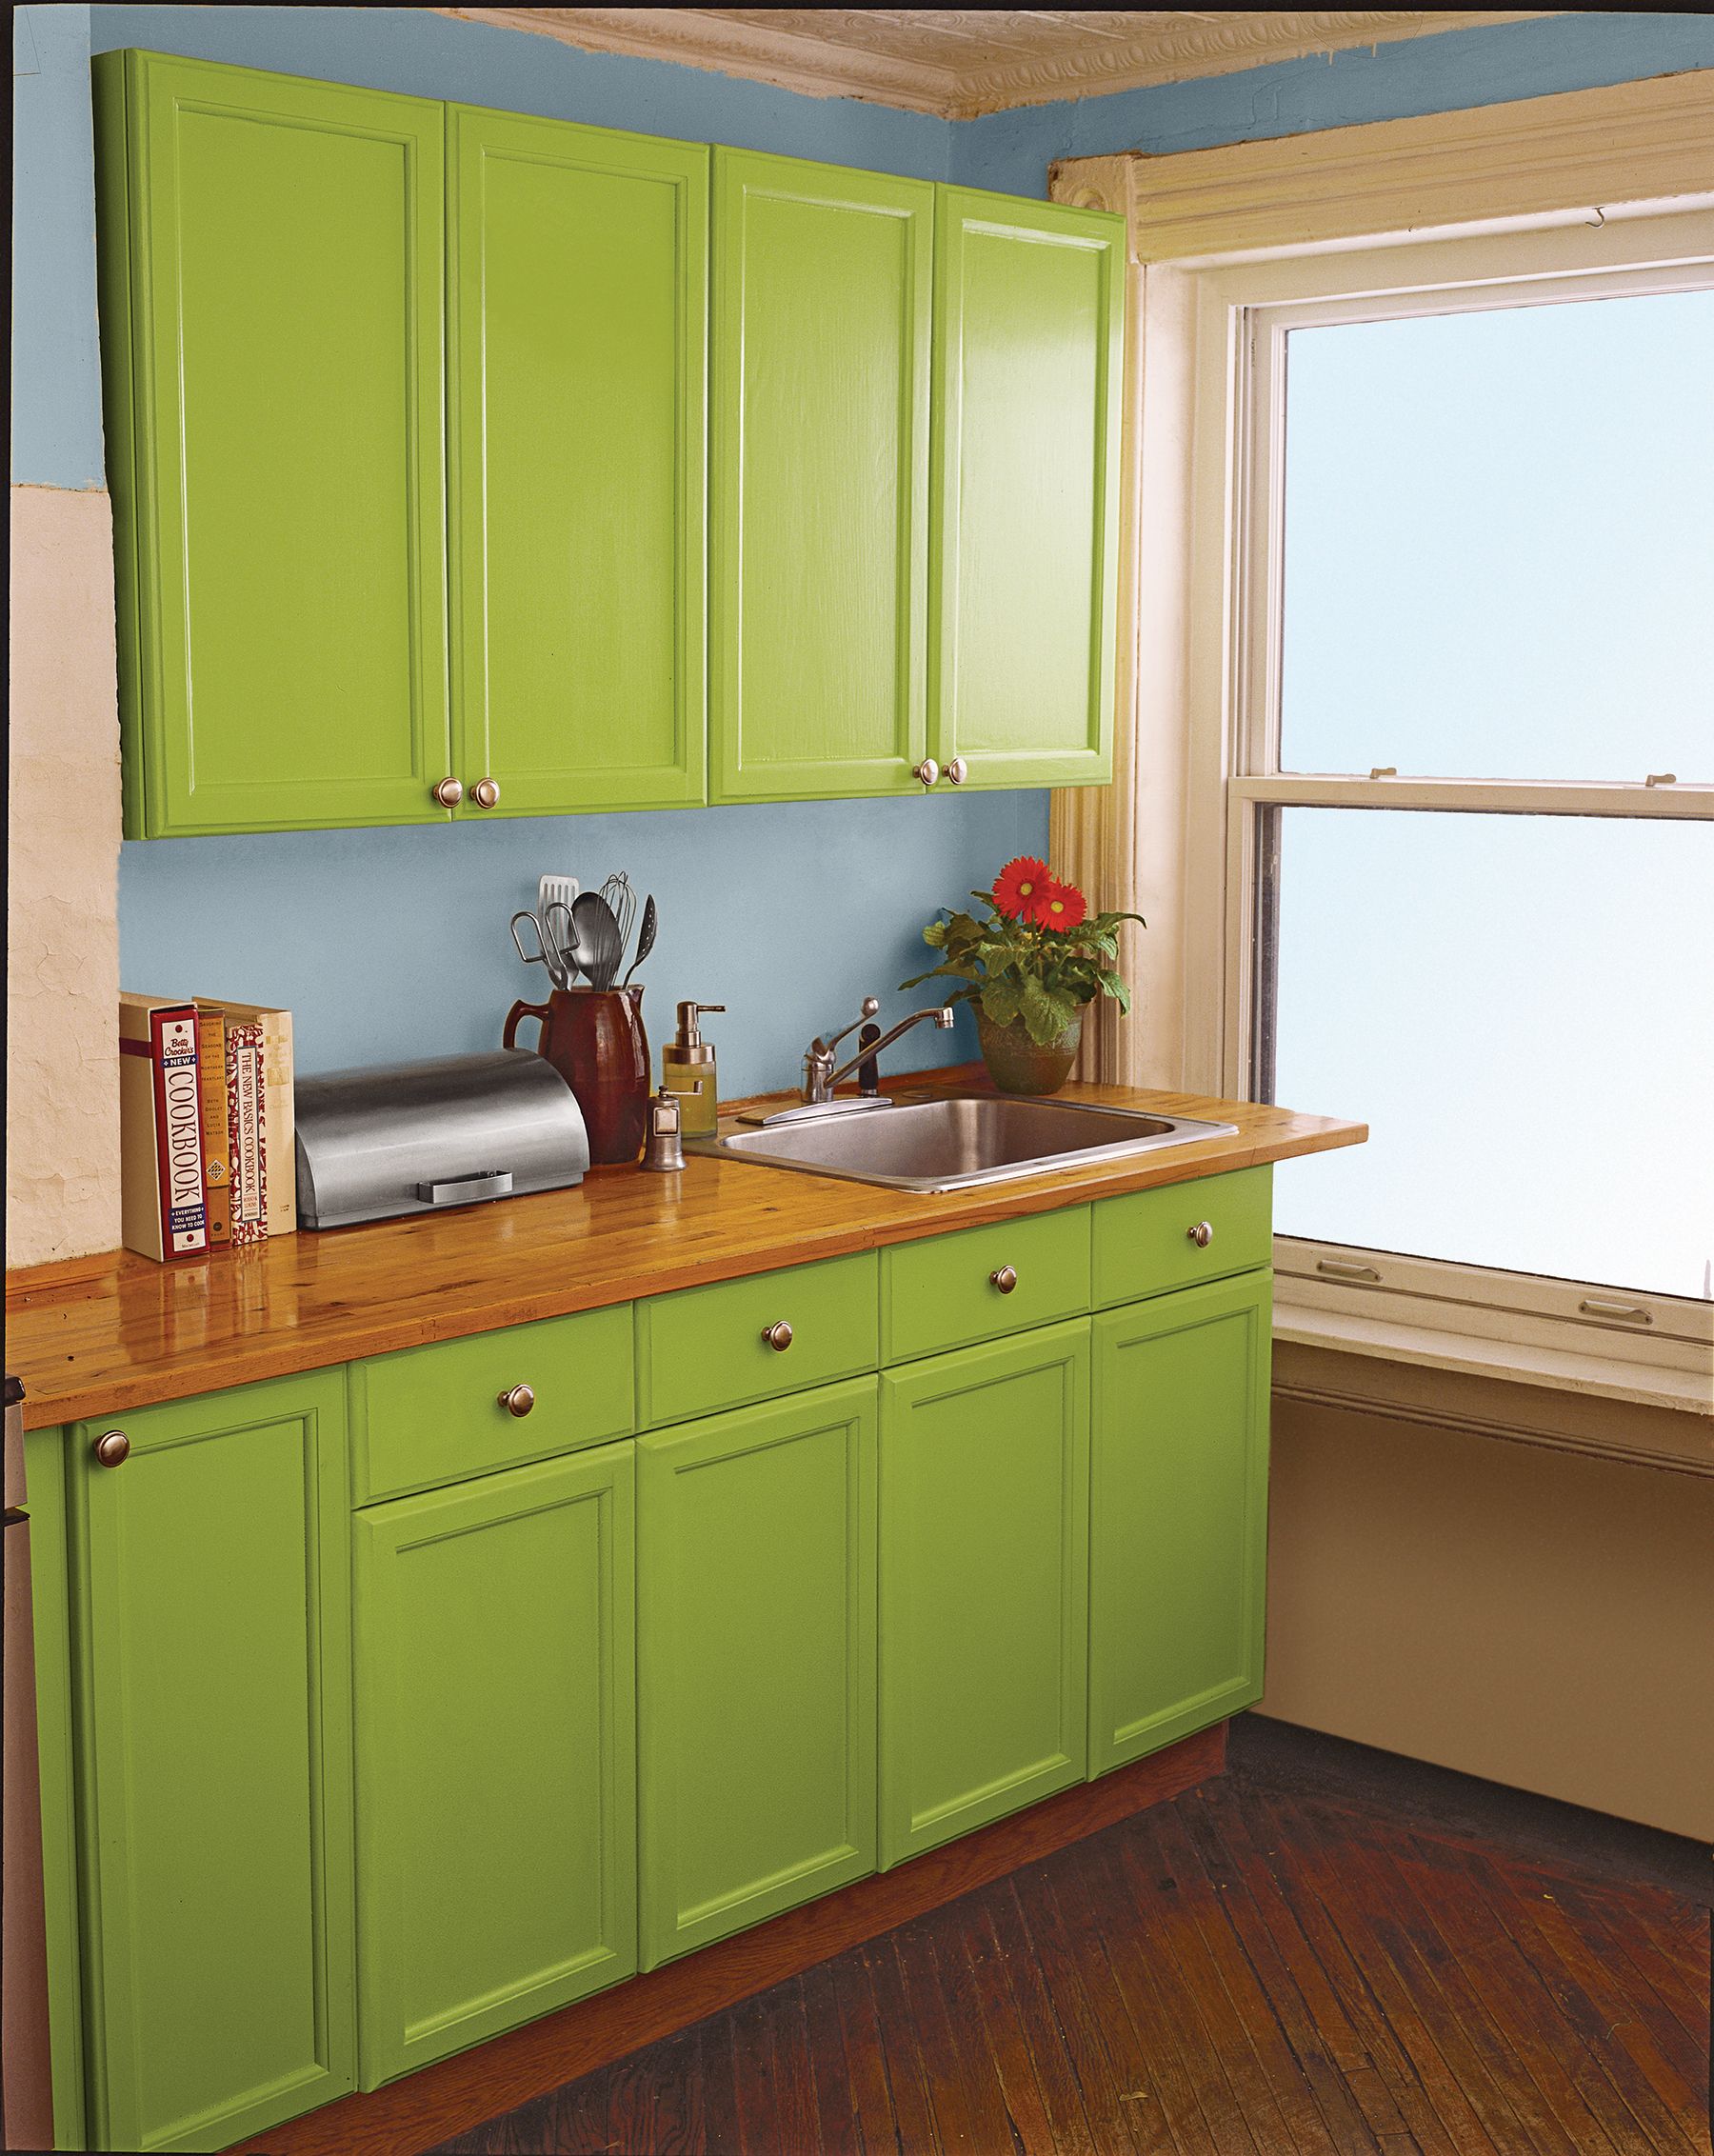 10 ways to redo kitchen cabinets without replacing them - this old